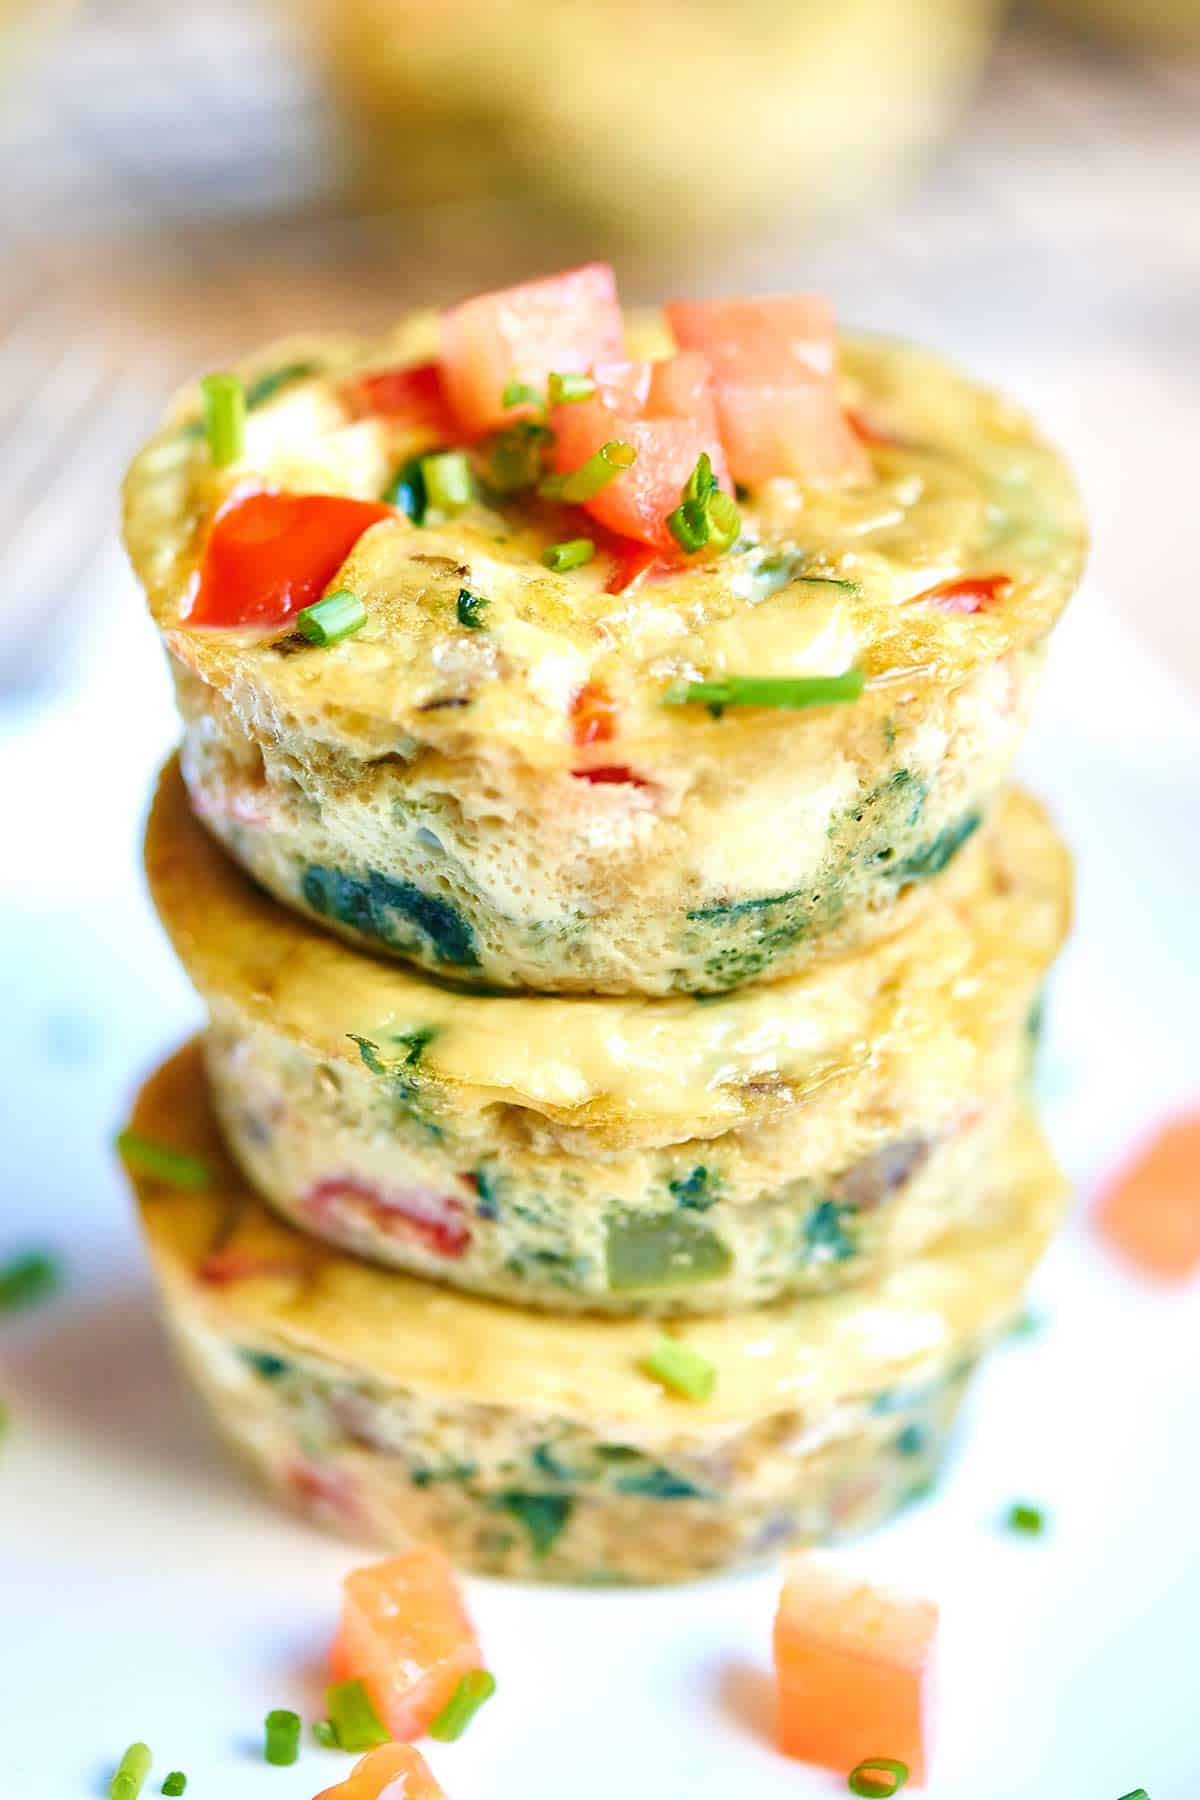 Start your day right with Healthy Egg Muffin Cups! Only 50 calories per muffin, LOADED with vegetables, and can be made in advance! showmetheyummy.com #healthyeggmuffincups #healthy #breakfast #vegetarian #eggmuffin #eggs #eggmuffincups